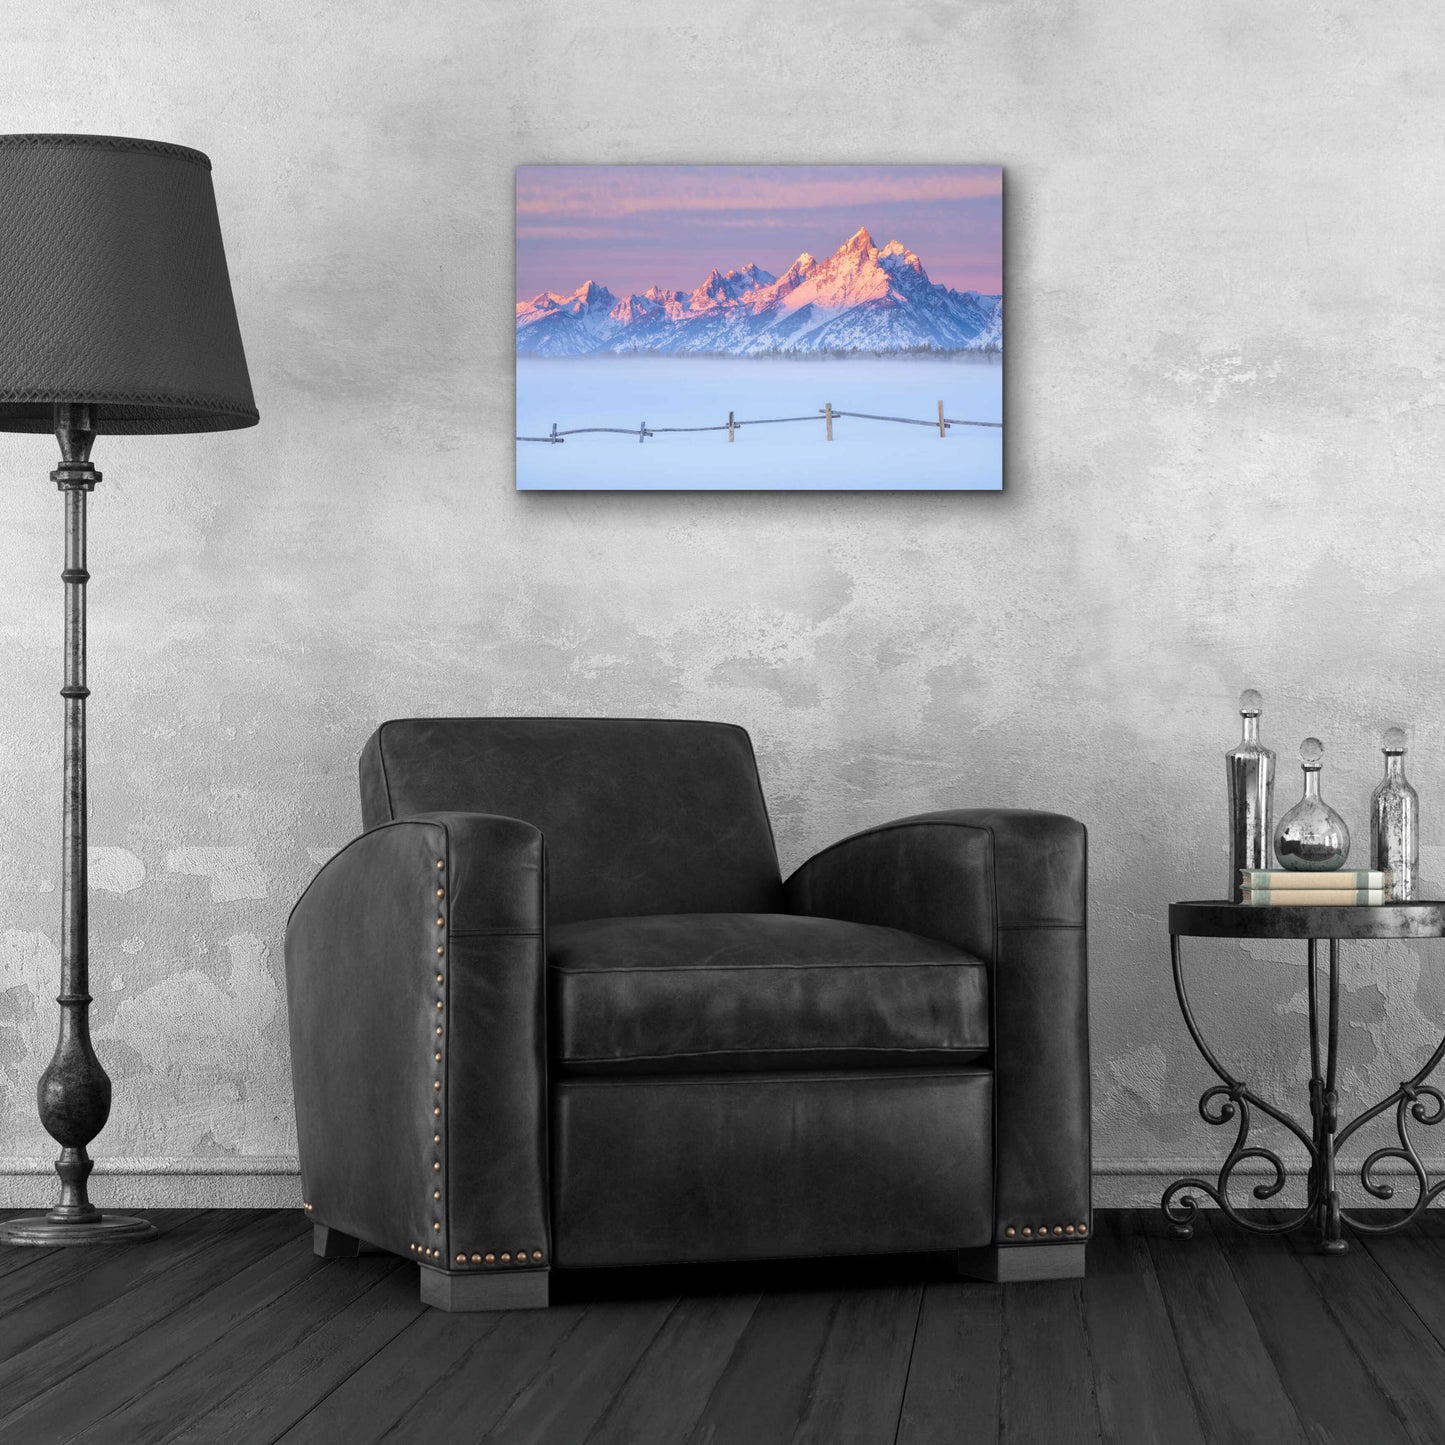 Epic Art 'Let there be Light - Grand Teton National Park' by Darren White, Acrylic Glass Wall Art,24x16